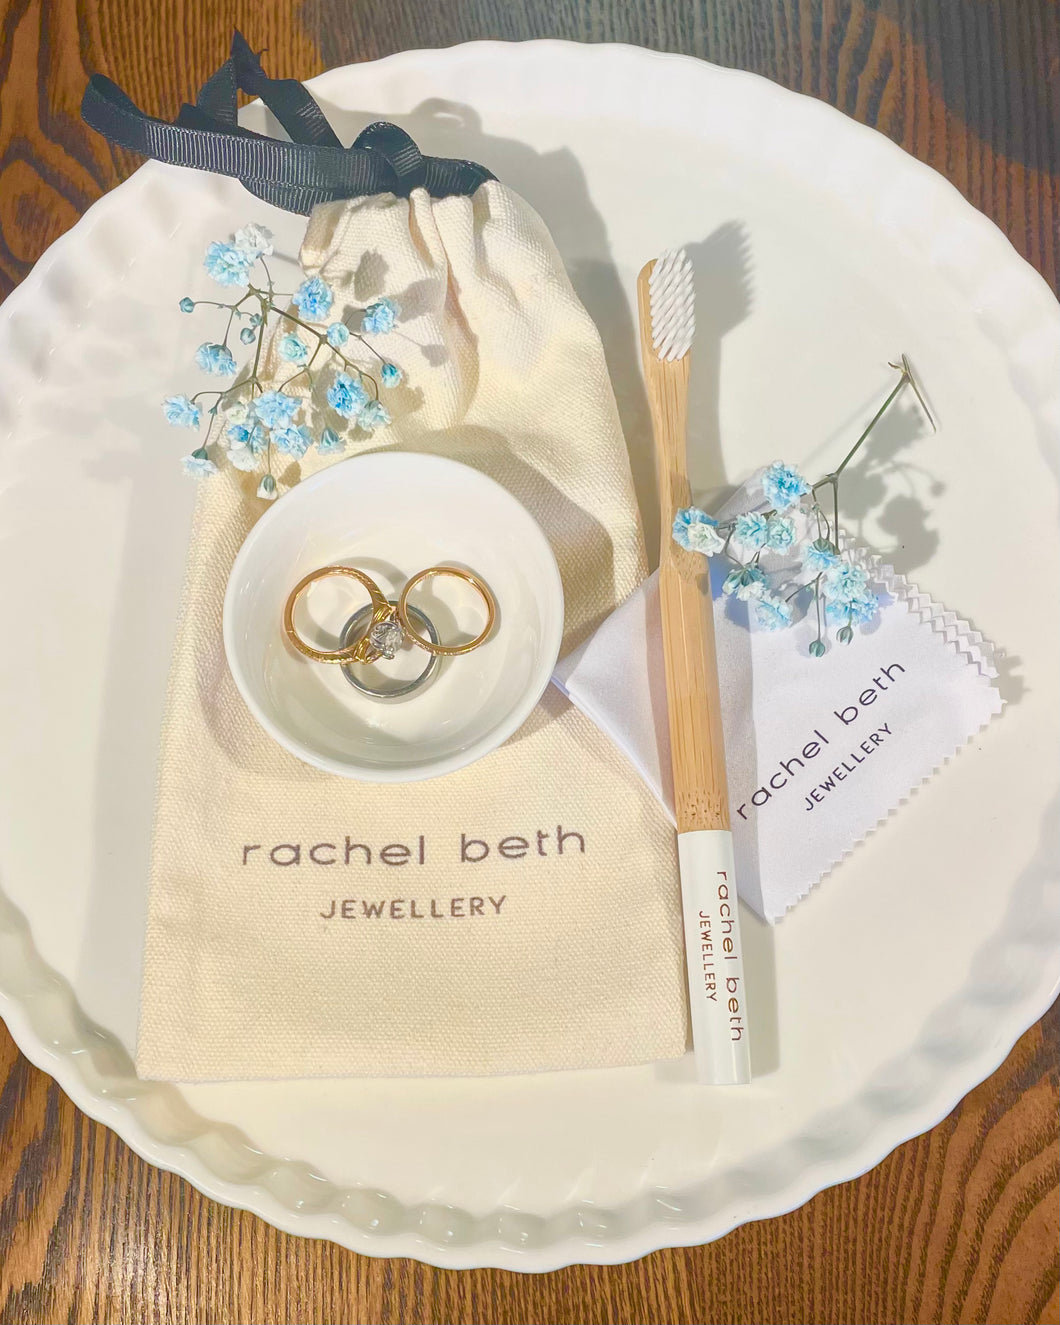 At Home Rachel Beth Jewellery Cleaning Kit  This includes:   - Ceramic tricket tray/cleaning bowl  - Bamboo 100% biodegradable cleaning brush  - Cleaning cloth  - Eco friendly canvas linen bag